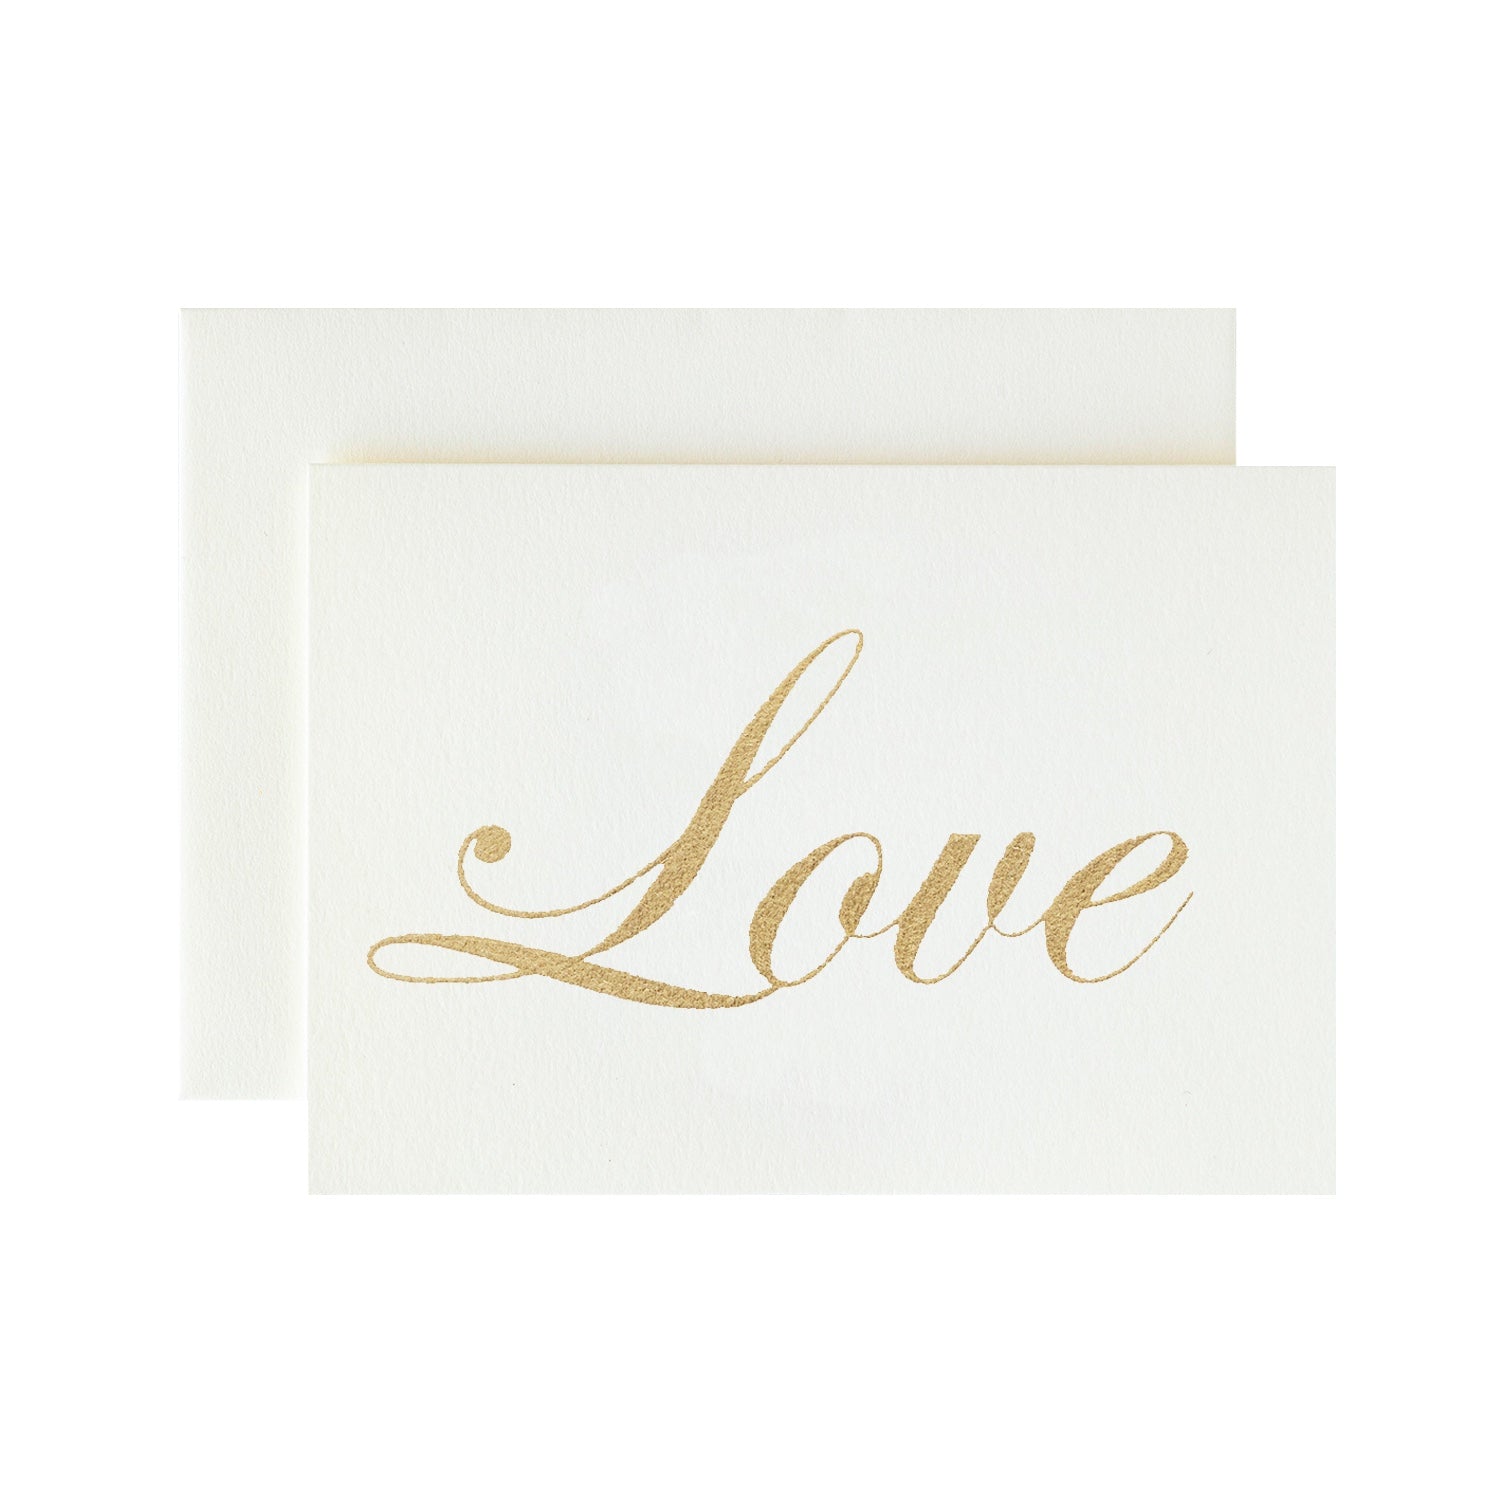 A hand-crafted Ivory Love Card adorned with the word love in gold foil, perfect for home goods or as exquisite gold leaf stationery made by Hester &amp; Cook.